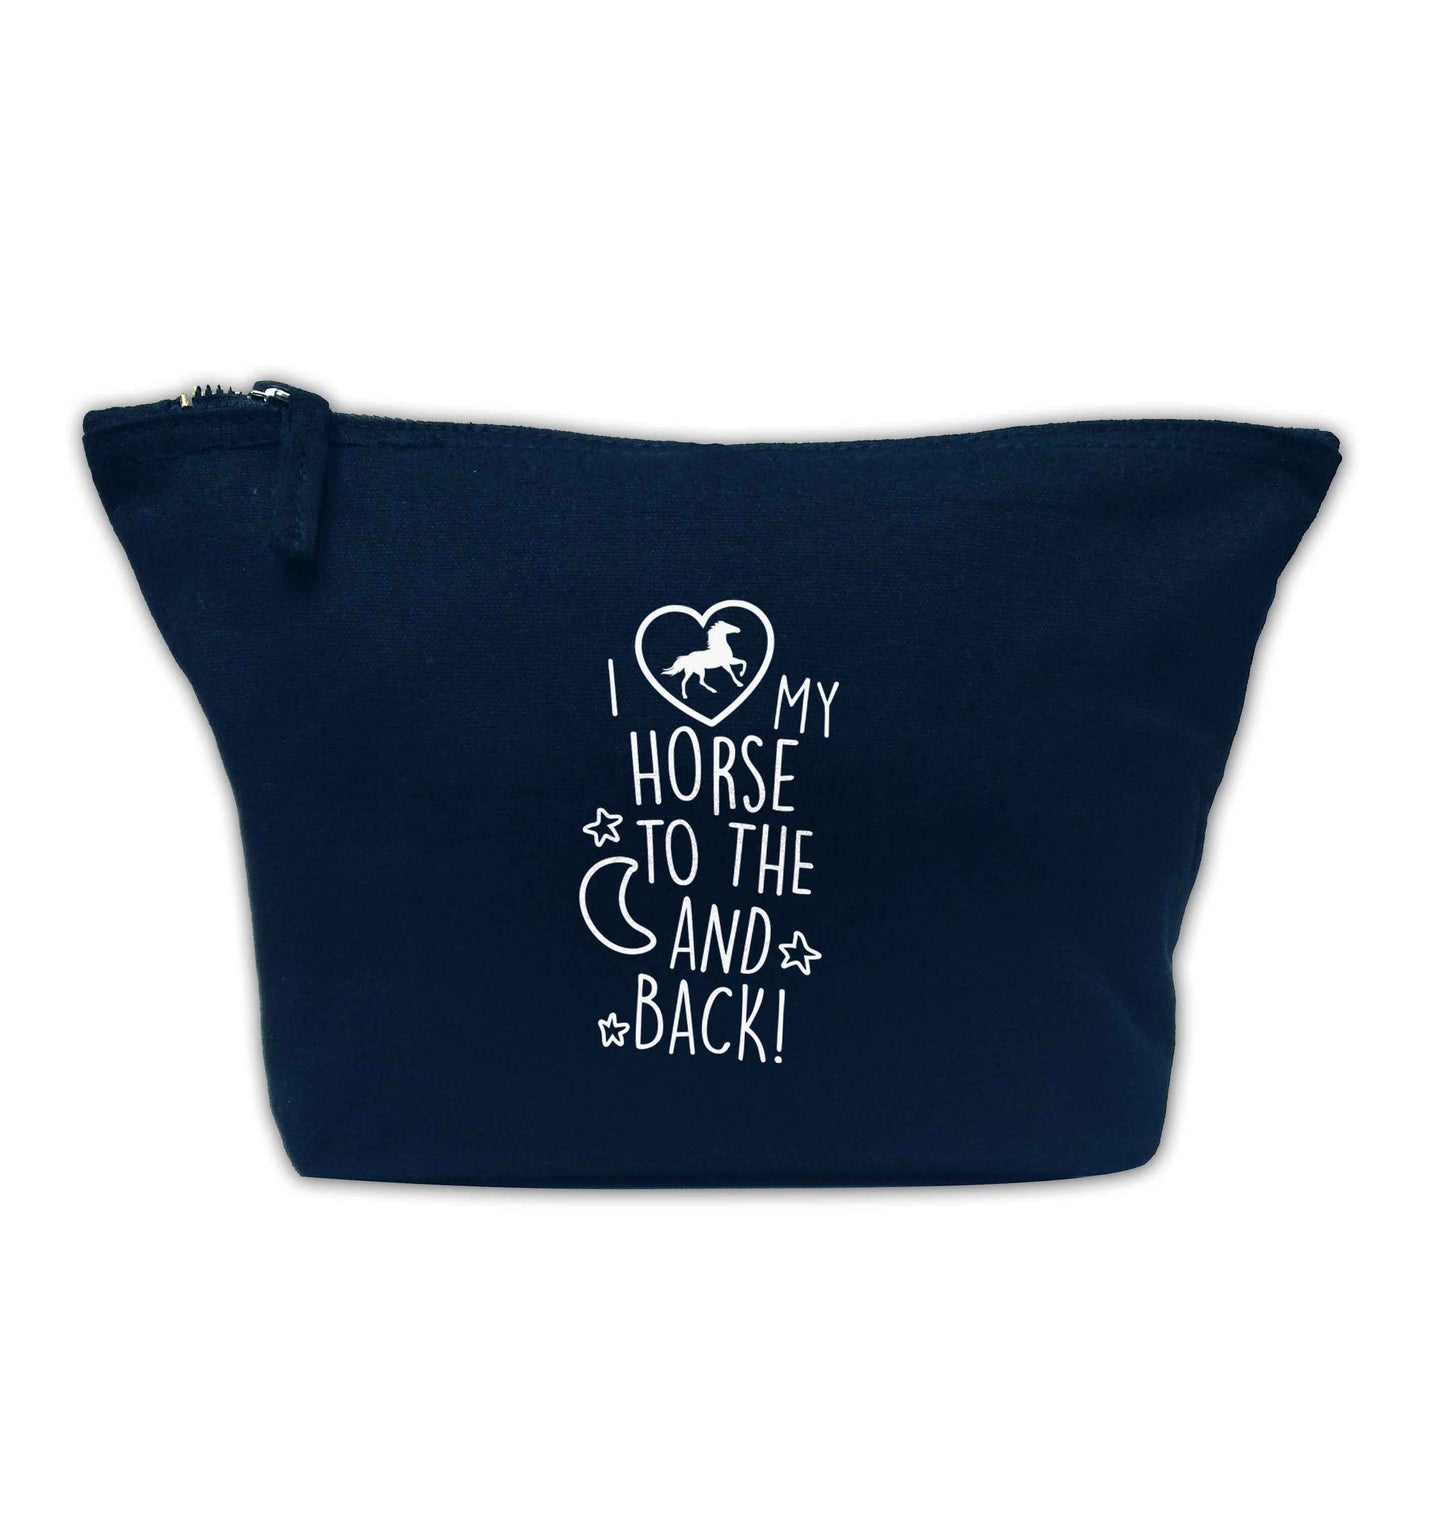 I love my horse to the moon and back navy makeup bag